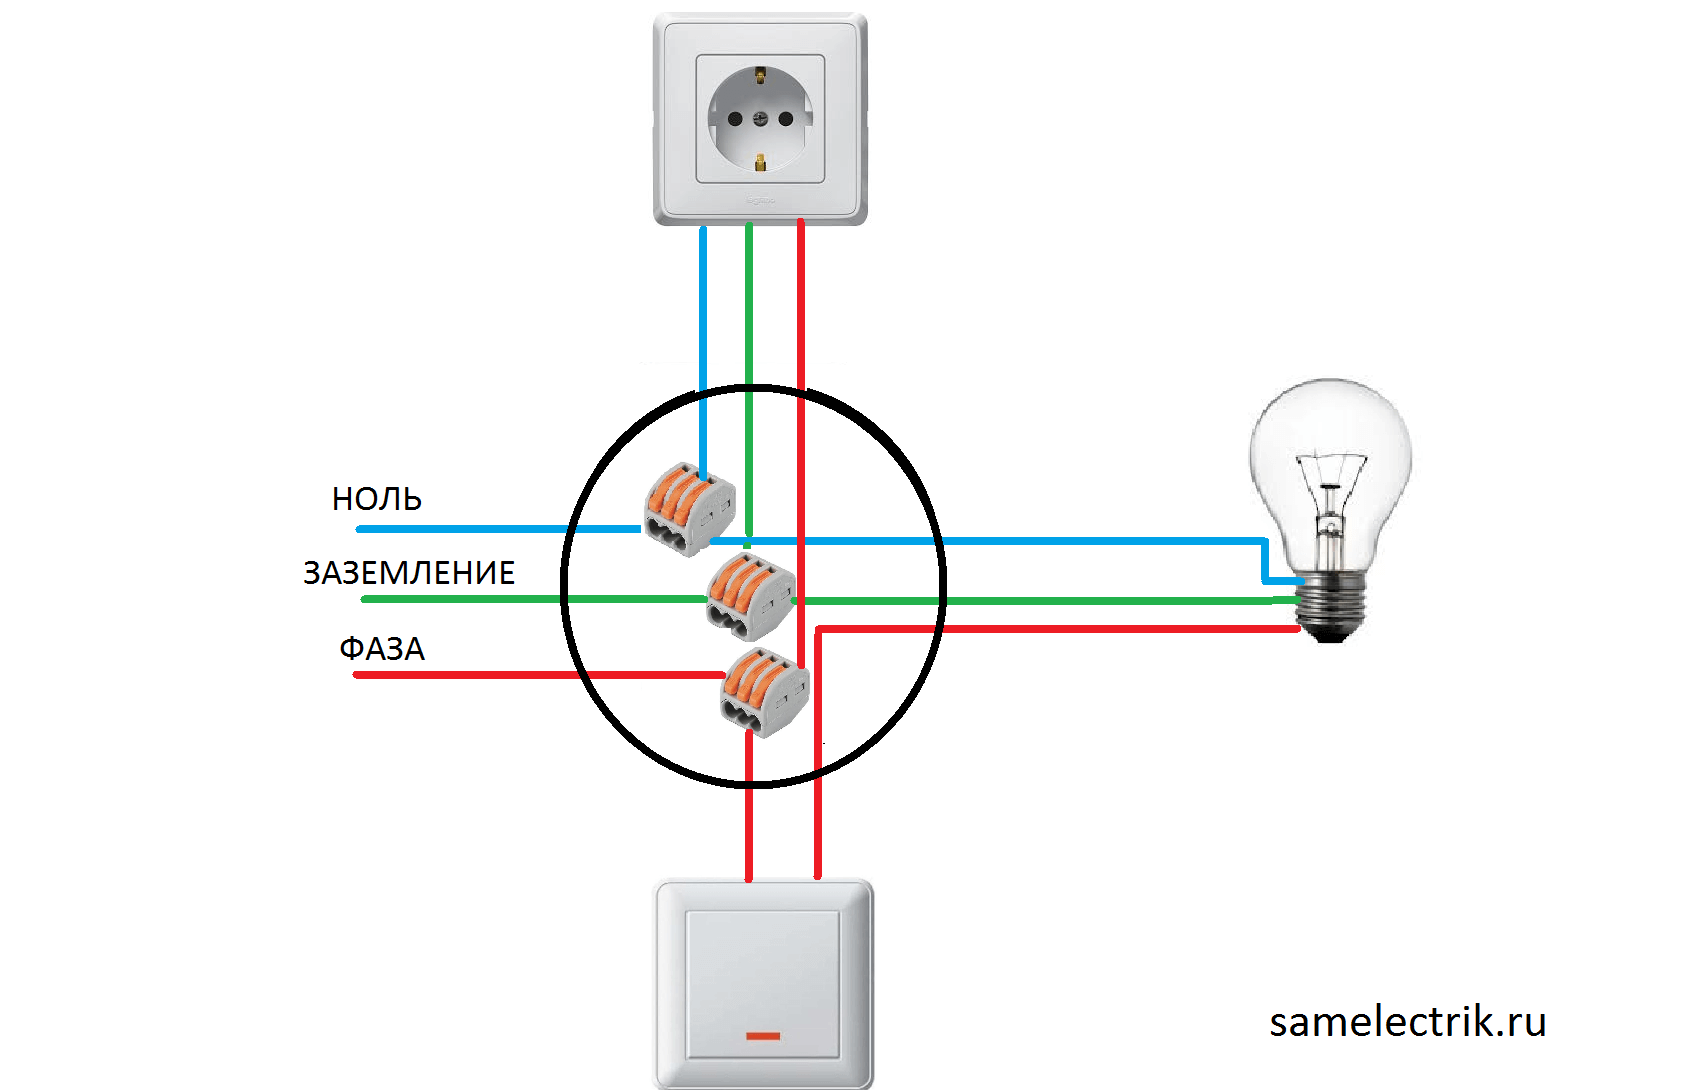 Connection diagram socket-switch-bulb